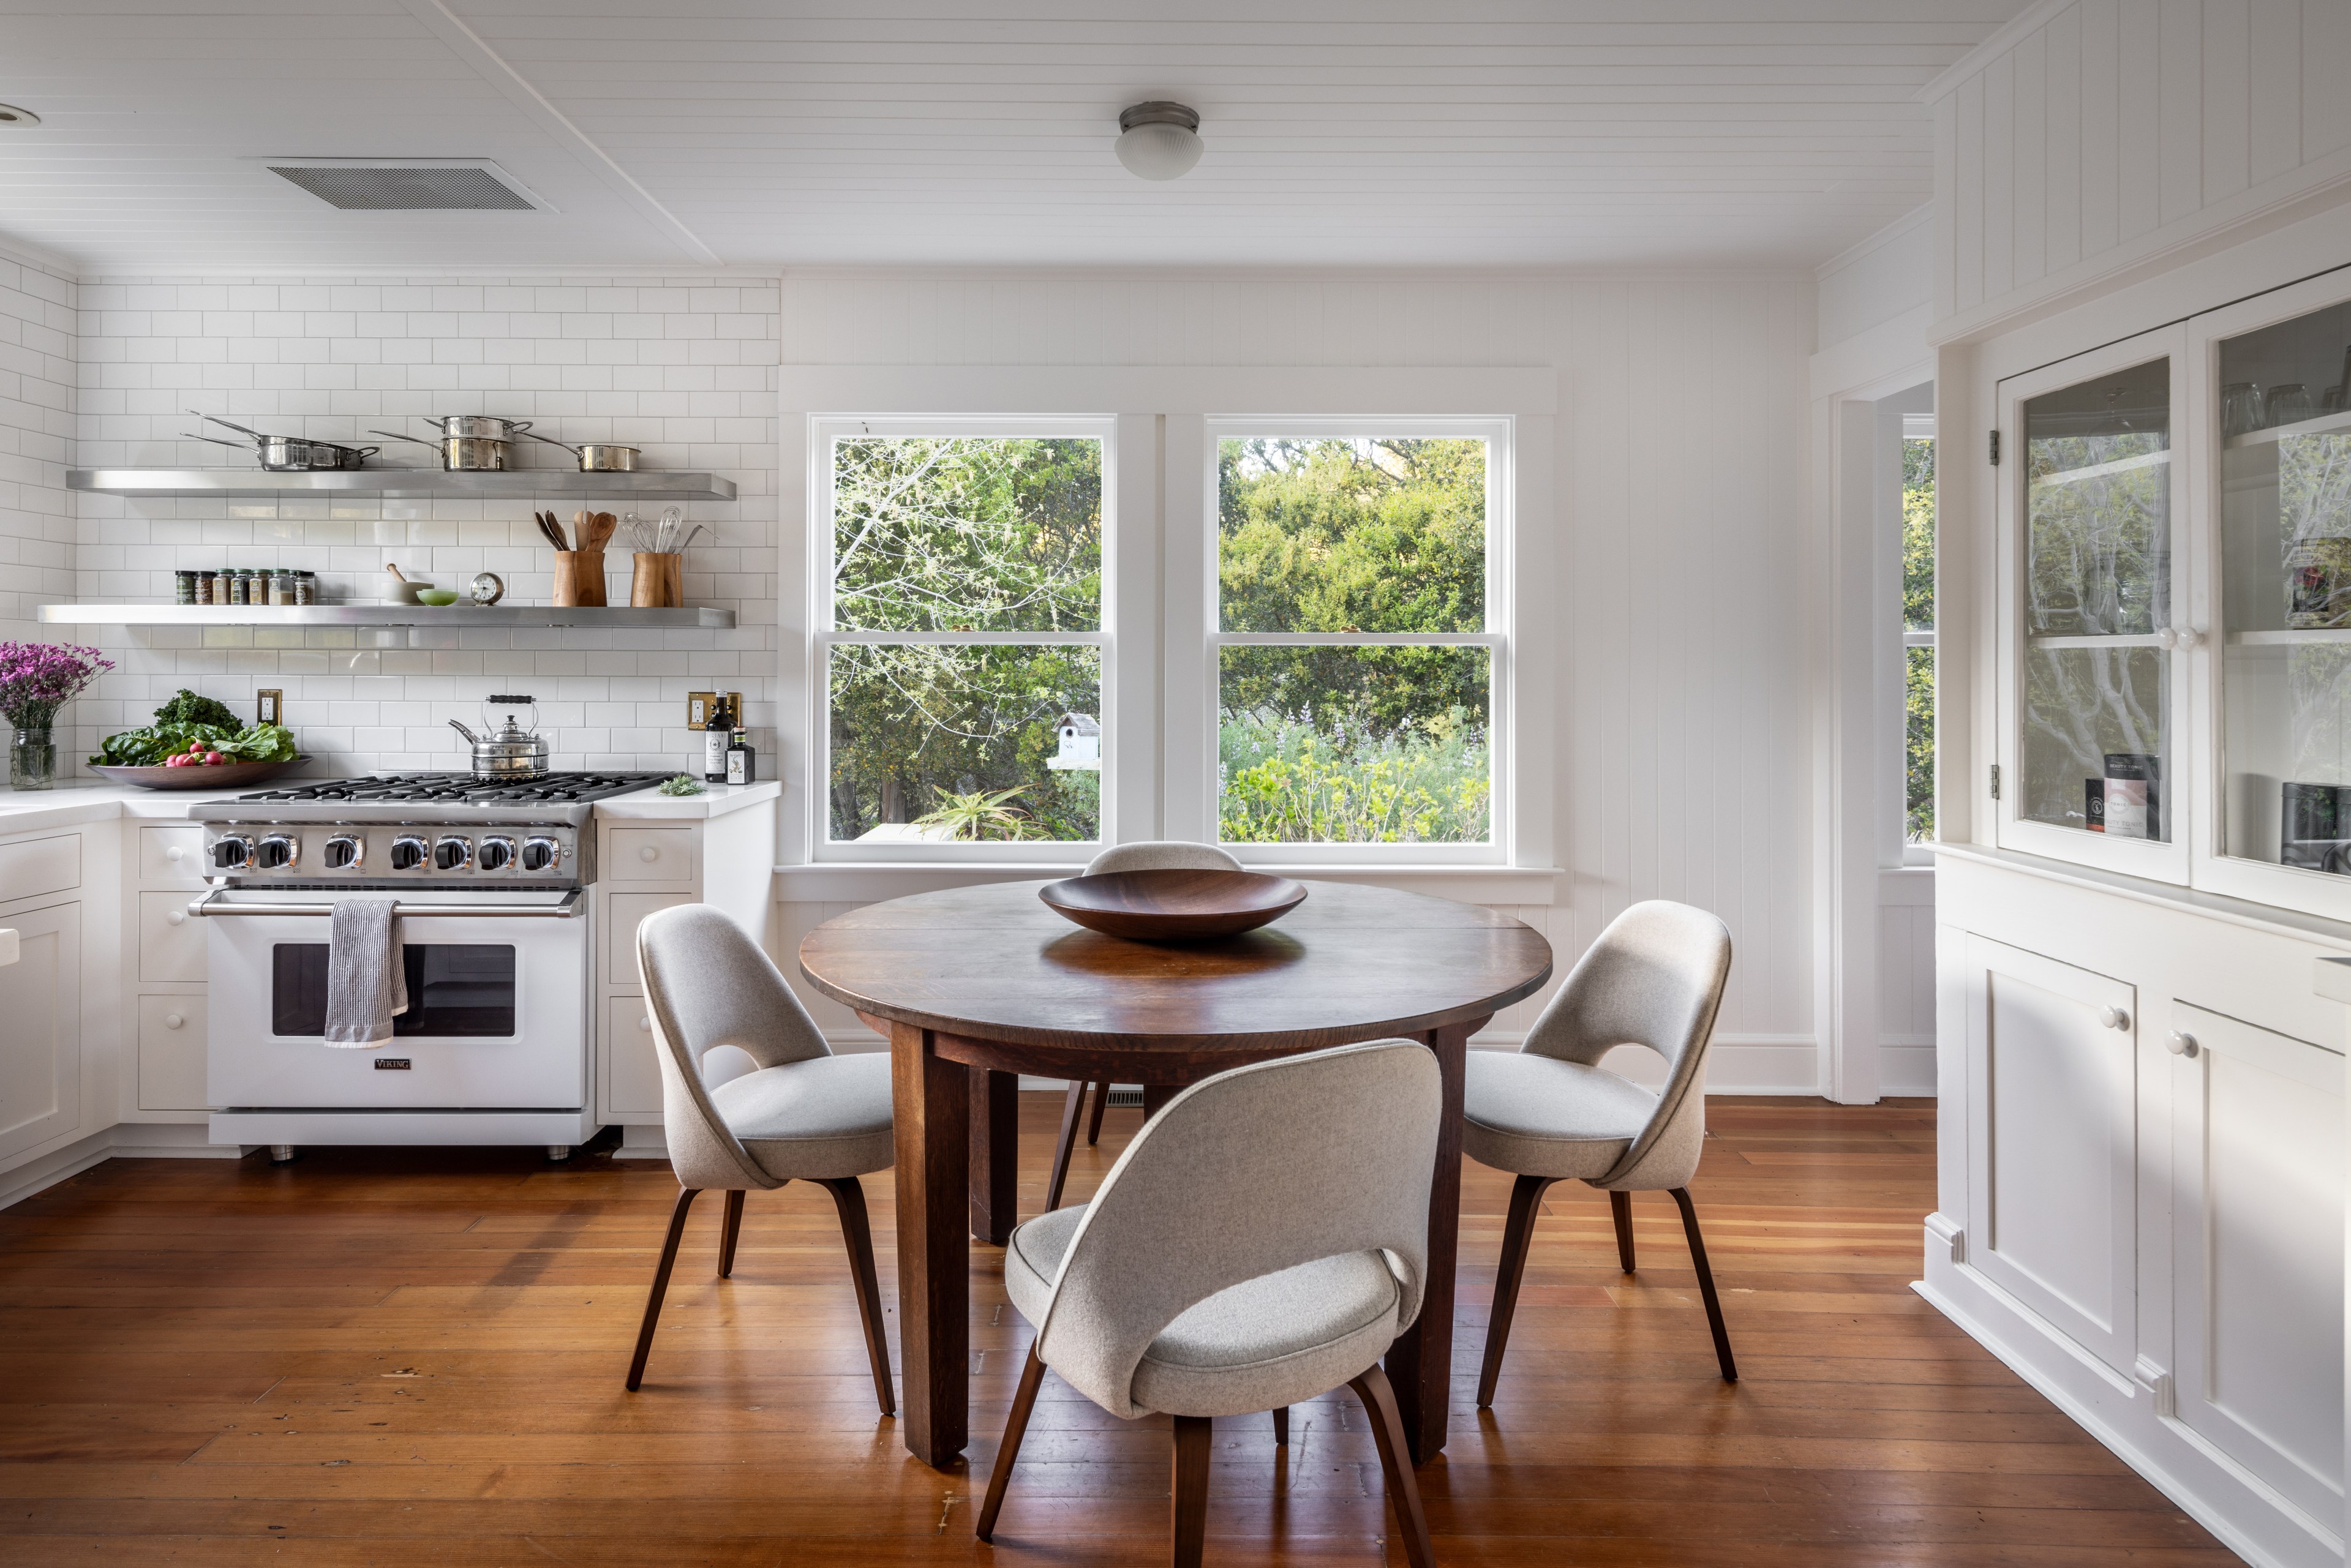 A bright kitchen with white cabinets, a round table, chairs, and a view of greenery outside the window.